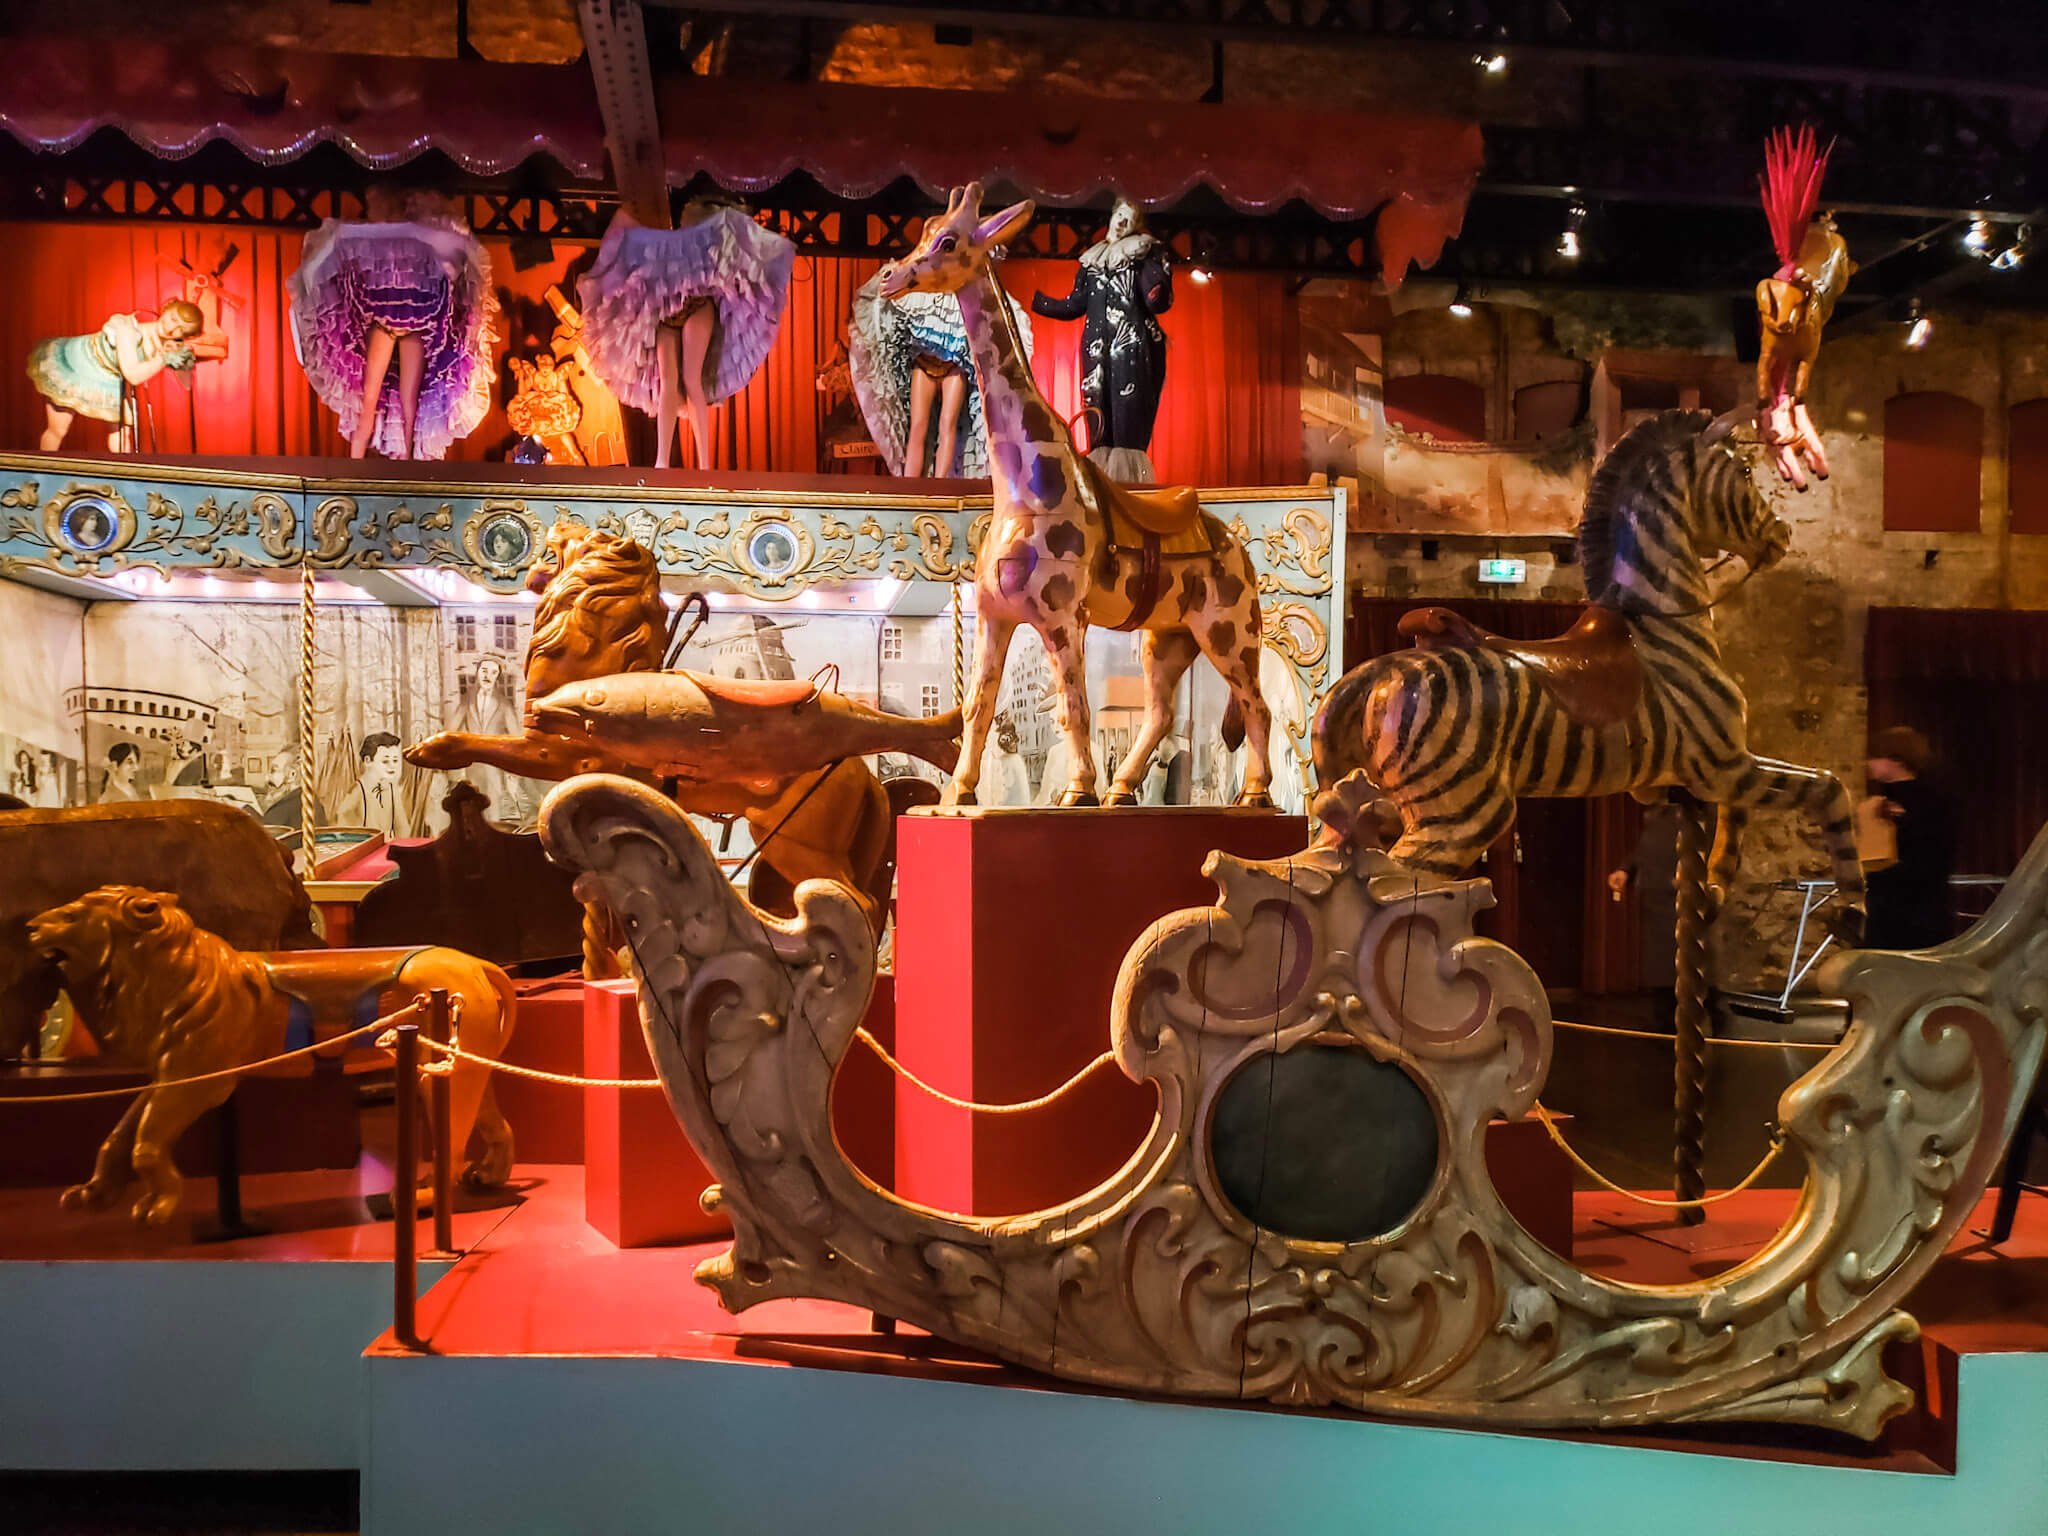 Musee des Arts Forains Christmas festival